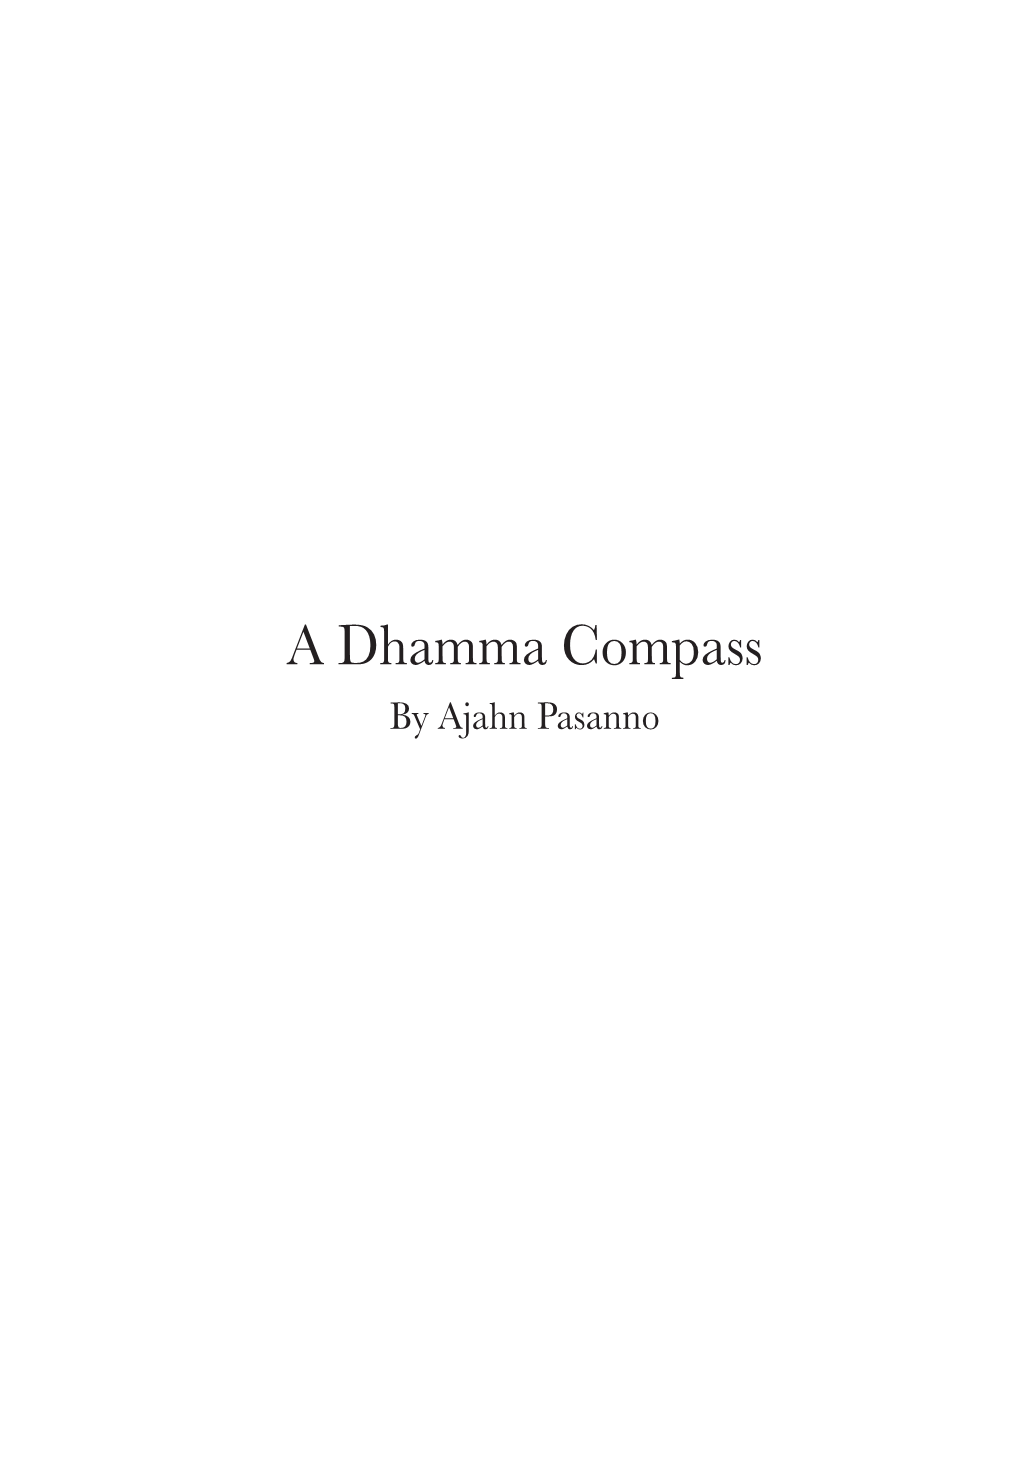 Aw a Dhamma Compass 3.Indd